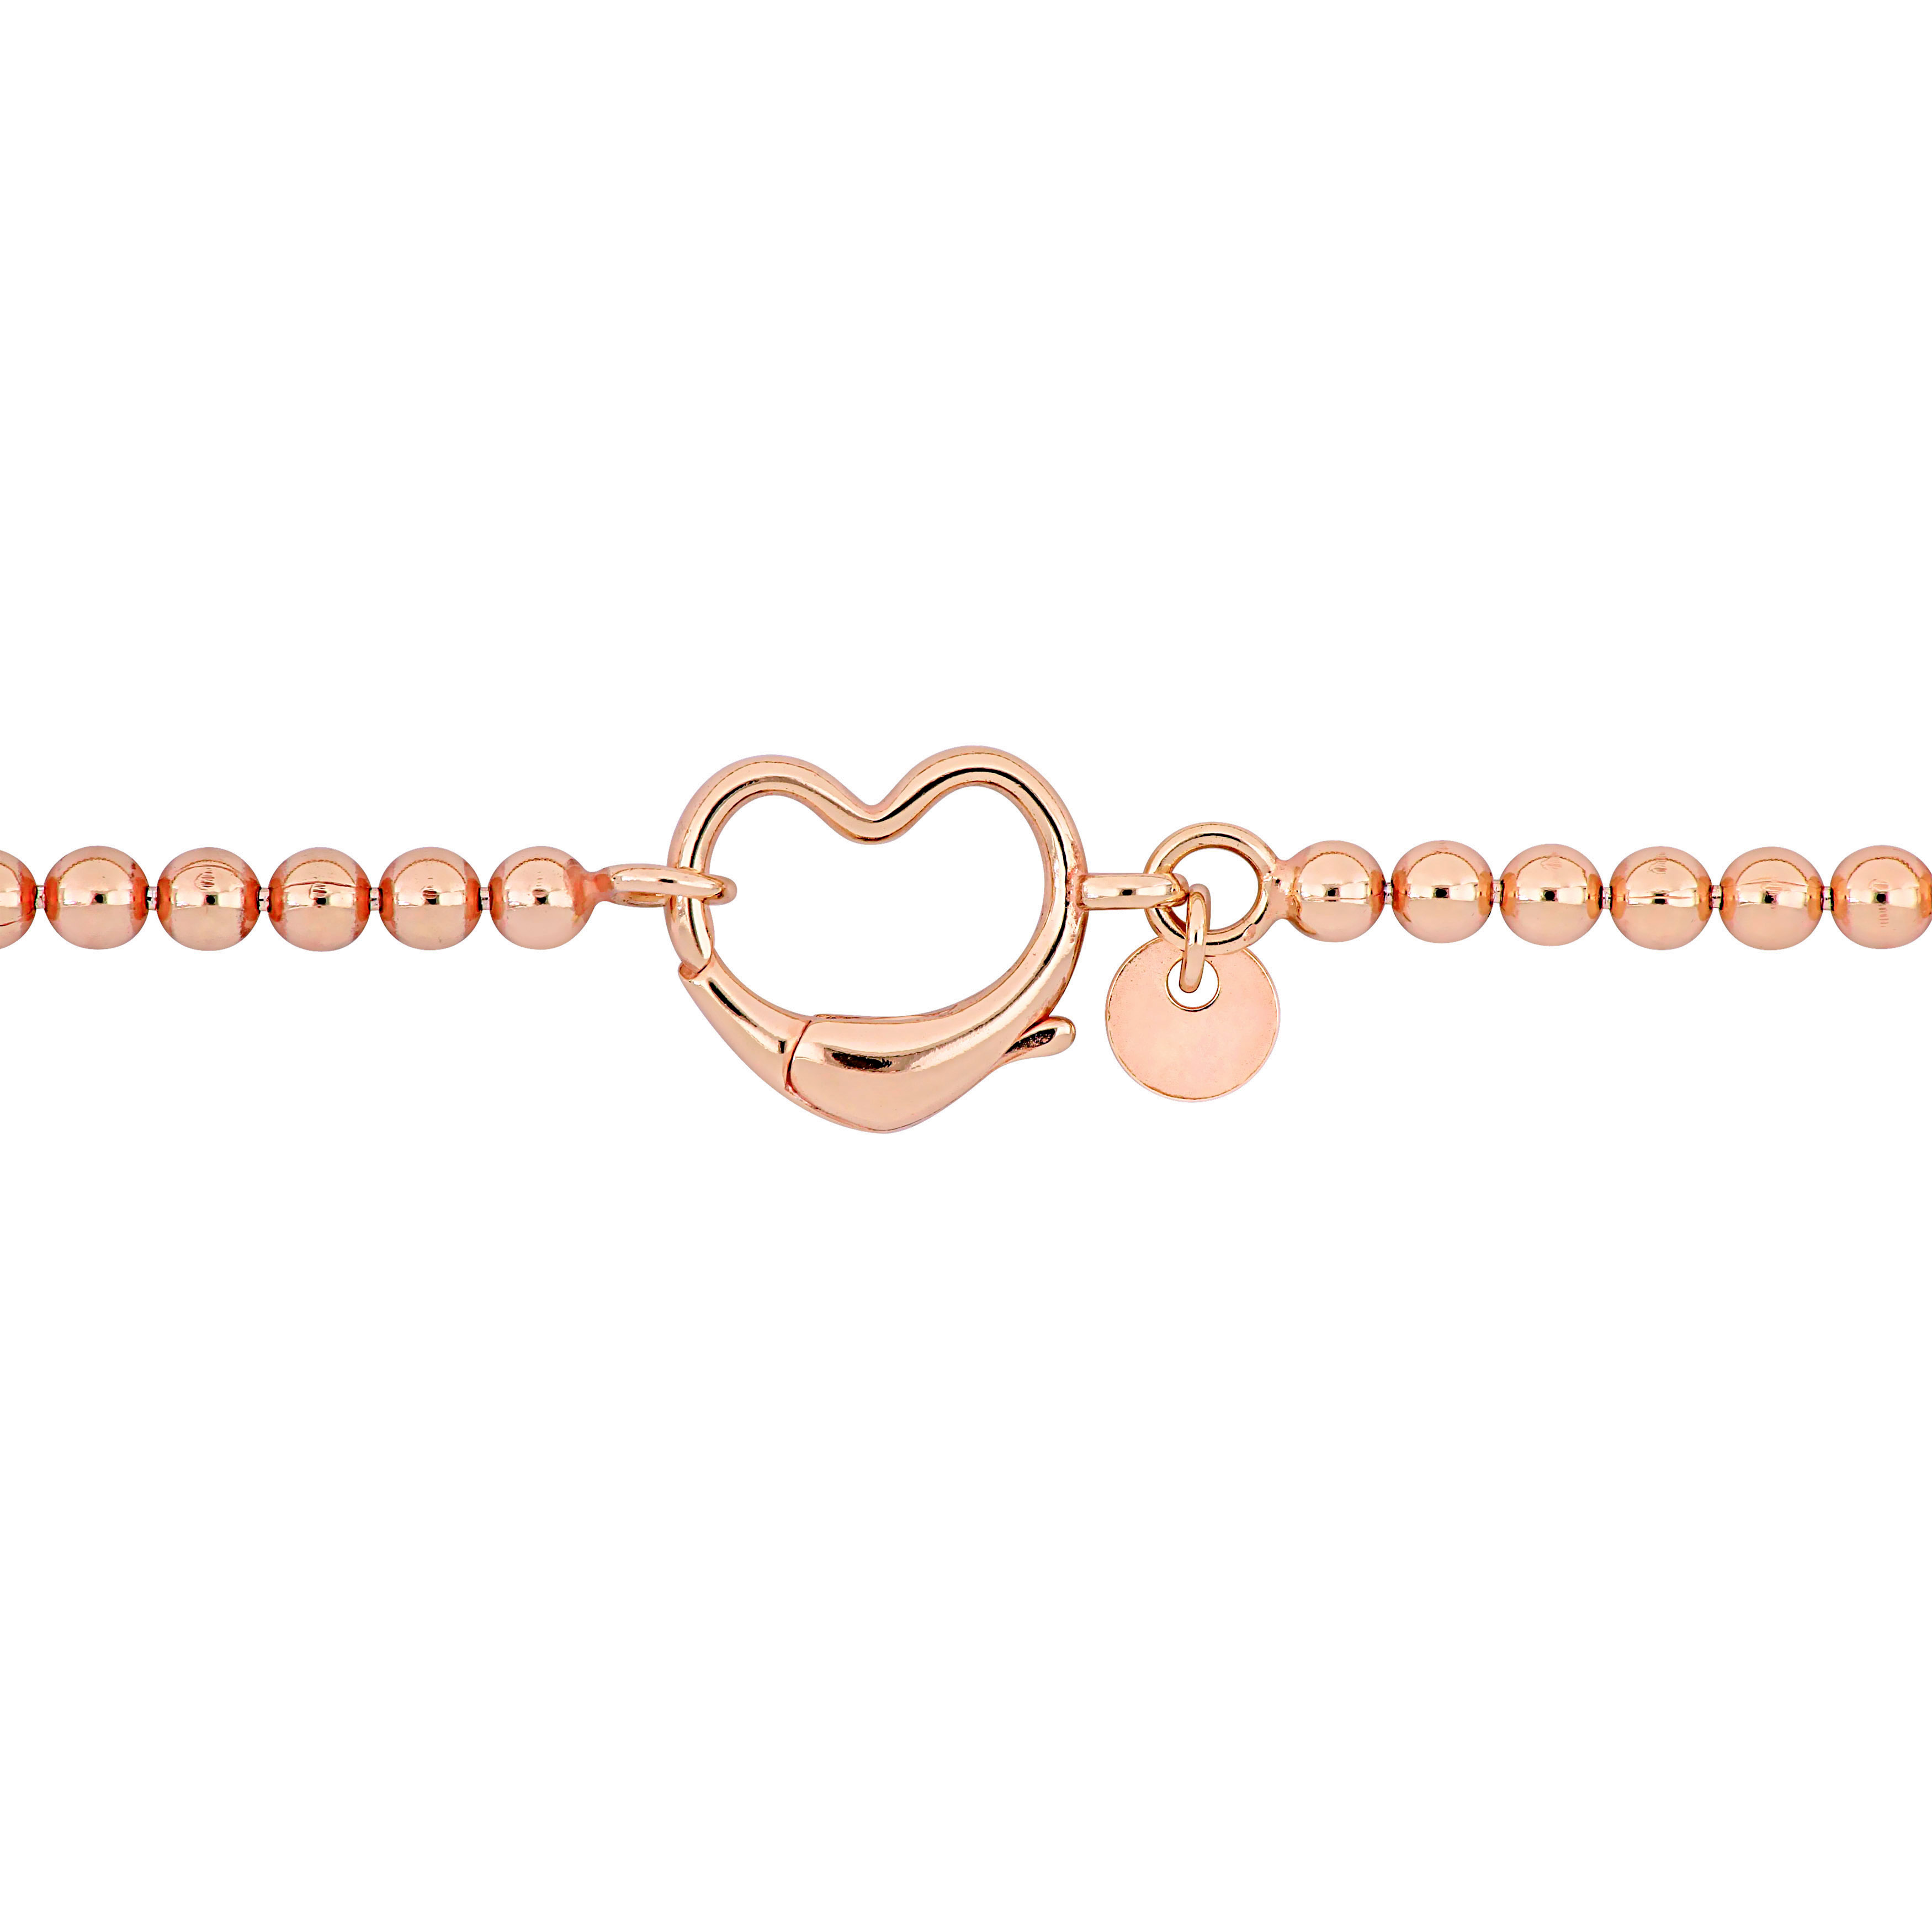 Pink bead link Bracelet with Heart Clasp in Rose Plated Sterling Silver - 7.5 in.